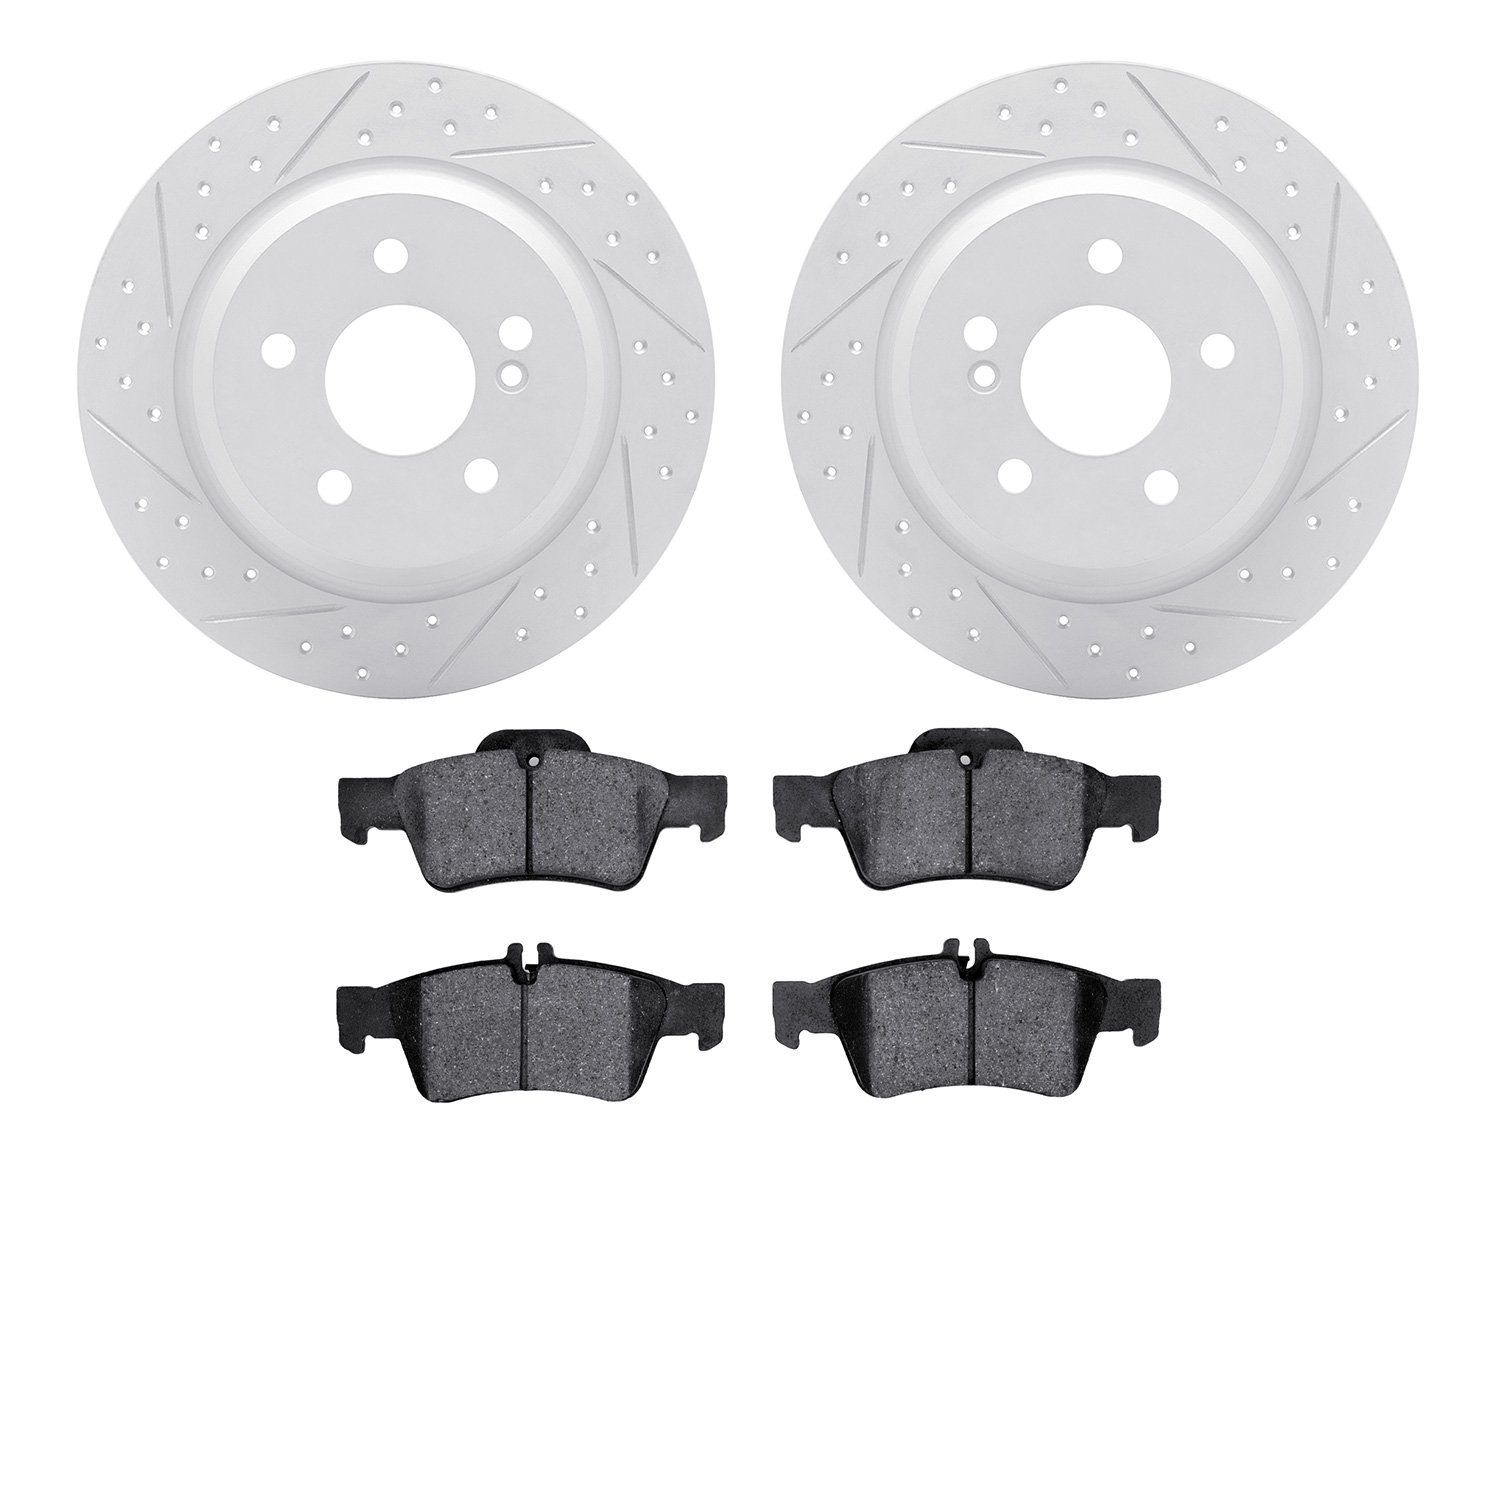 2502-63026 Geoperformance Drilled/Slotted Rotors w/5000 Advanced Brake Pads Kit, 2003-2009 Mercedes-Benz, Position: Rear